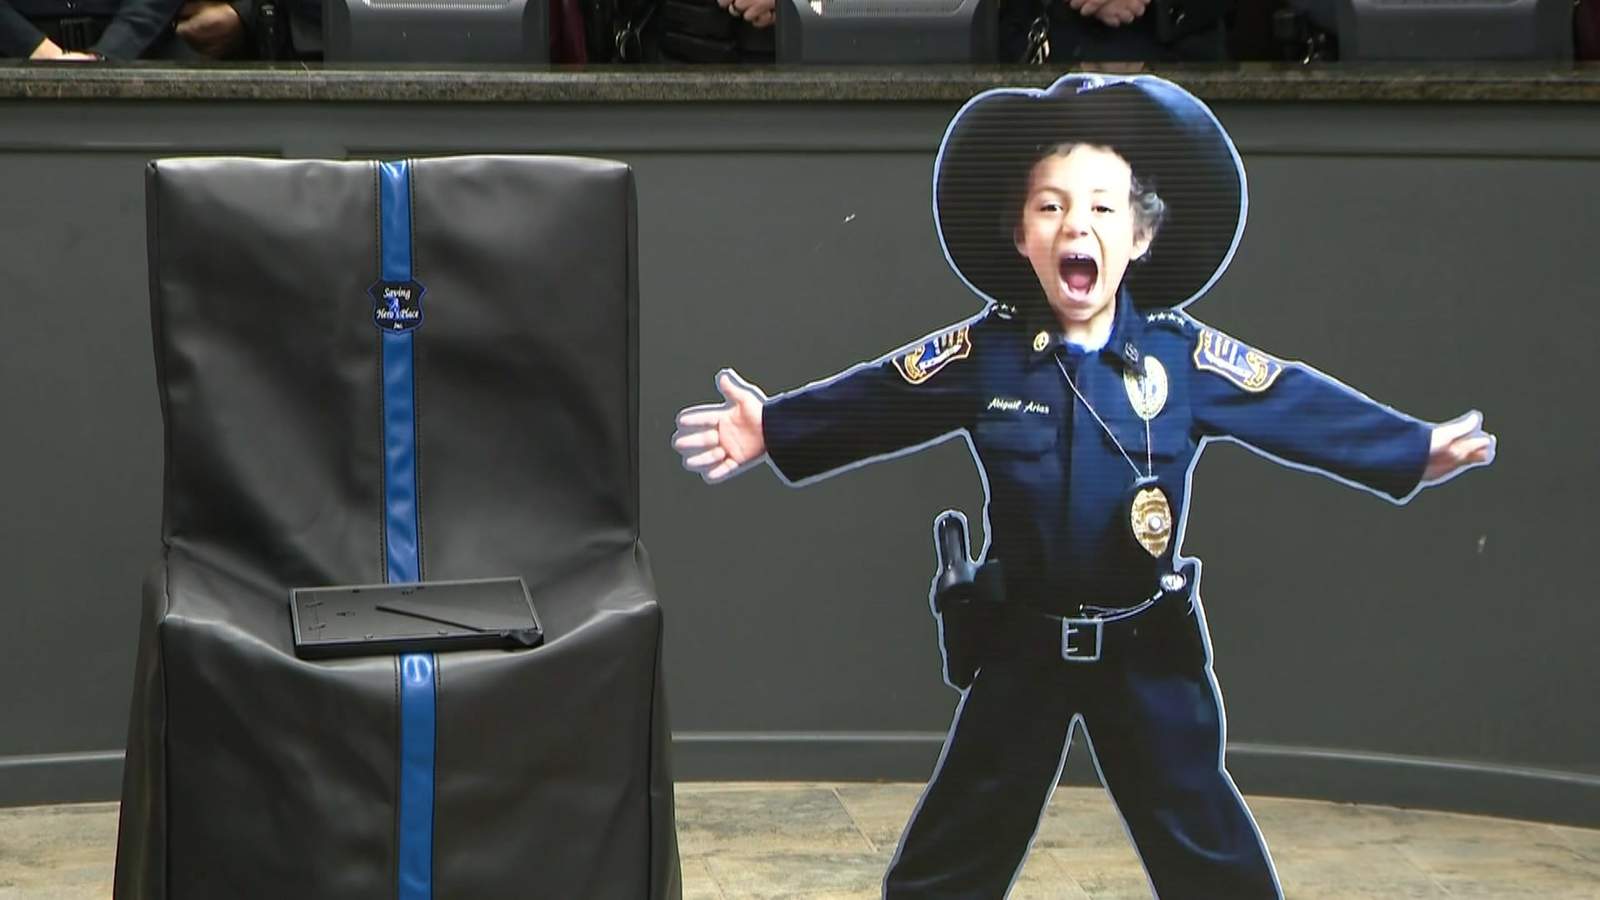 Bells for Abigail: Celebrating Abigail Arias one year after she was sworn in as an honorary Freeport police officer